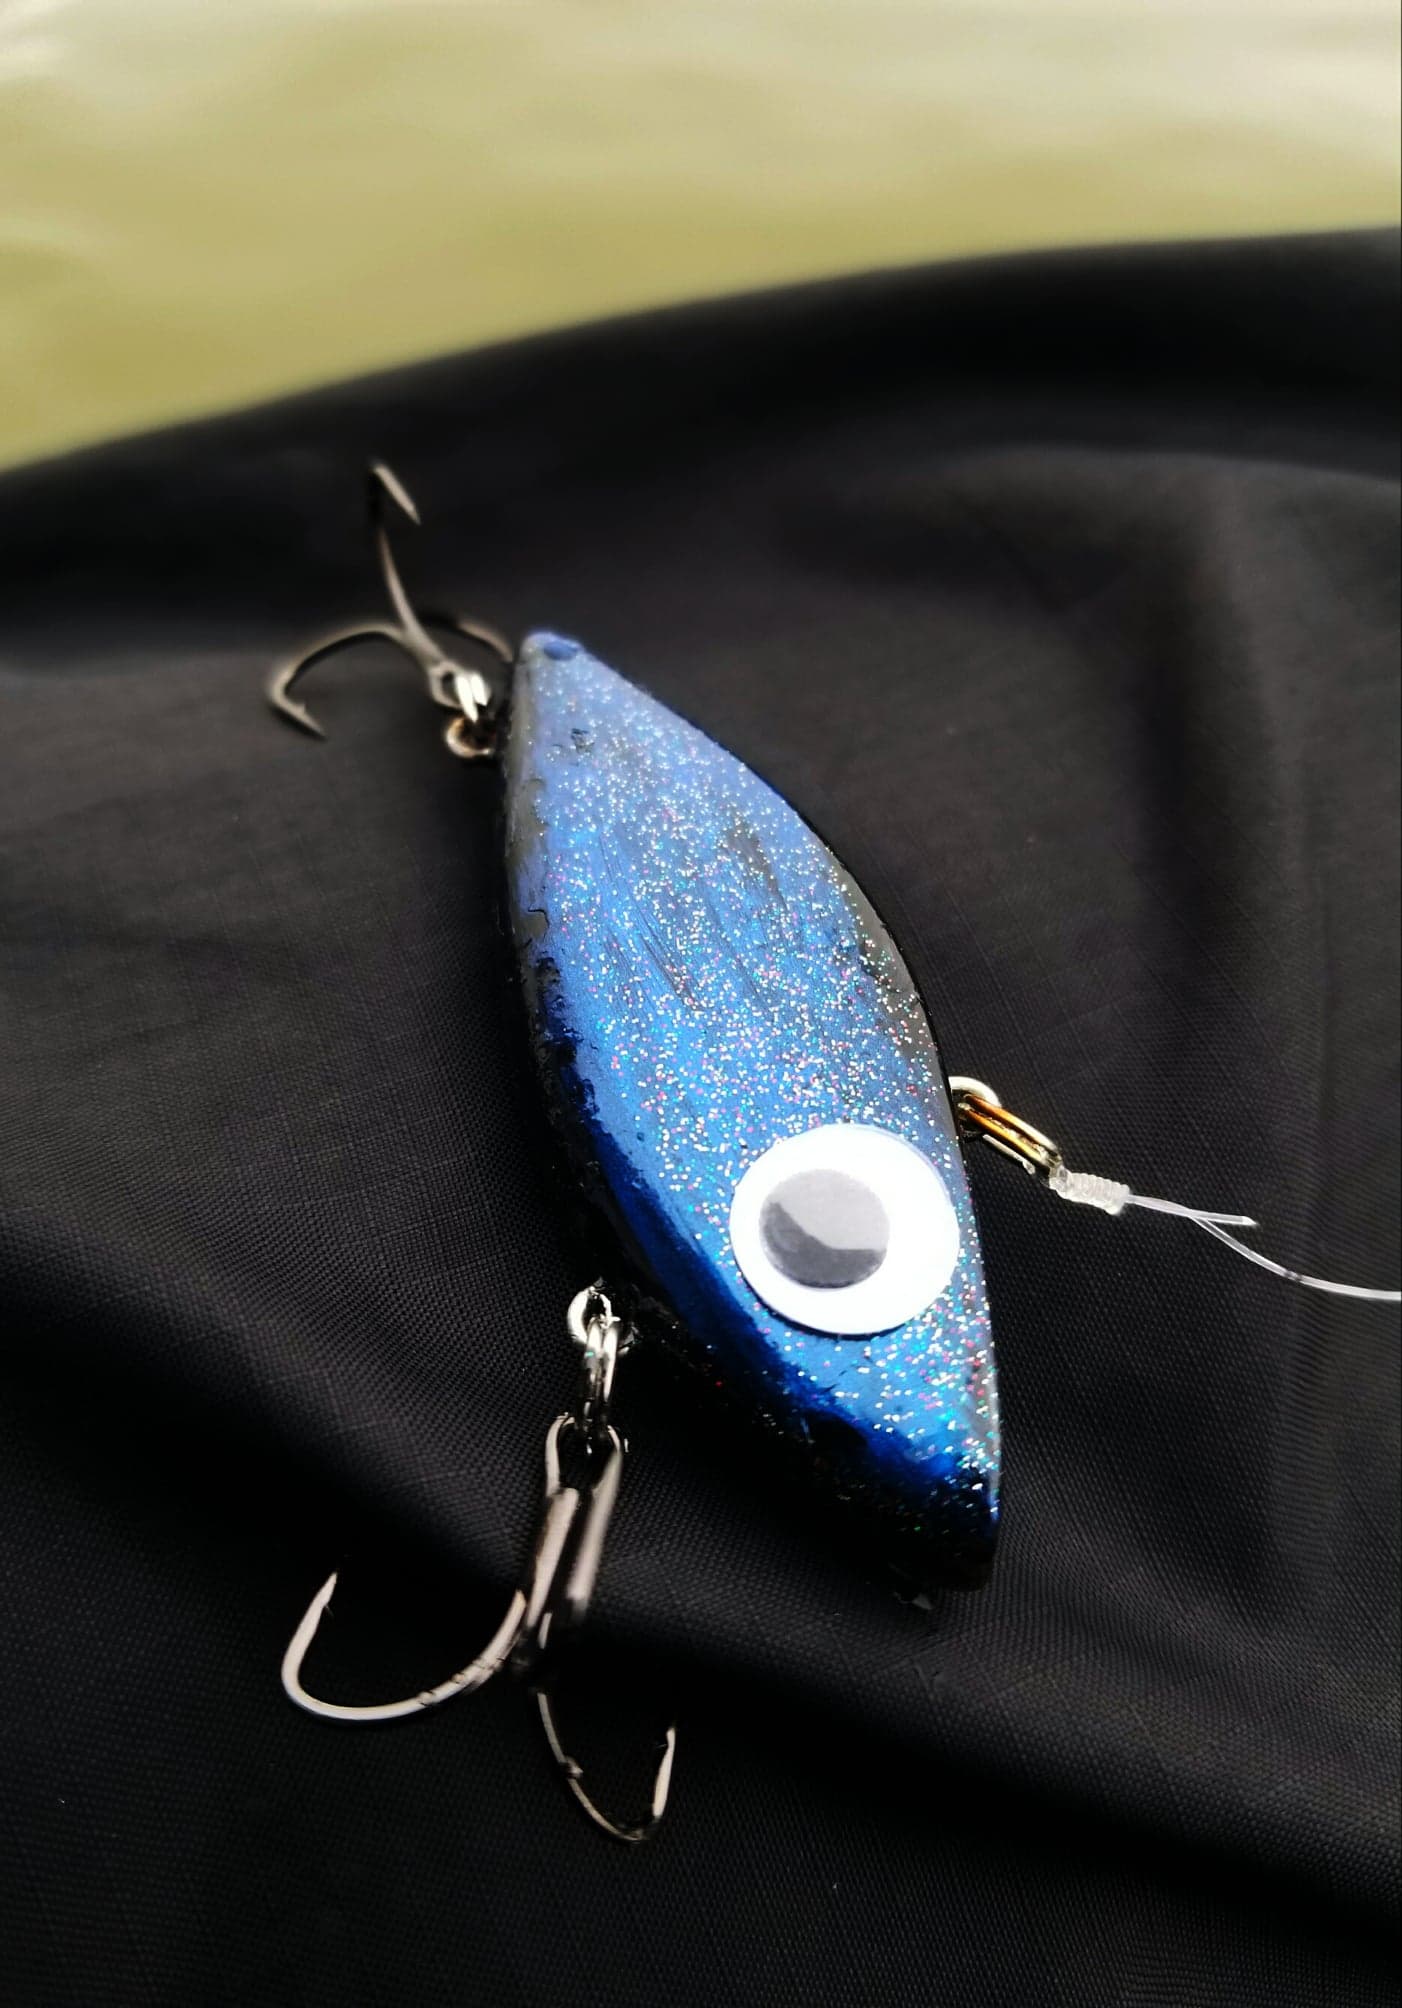 Black and blue painted Rattle Trap lure with glitter clear coat and googly eyes tied onto a fishing line